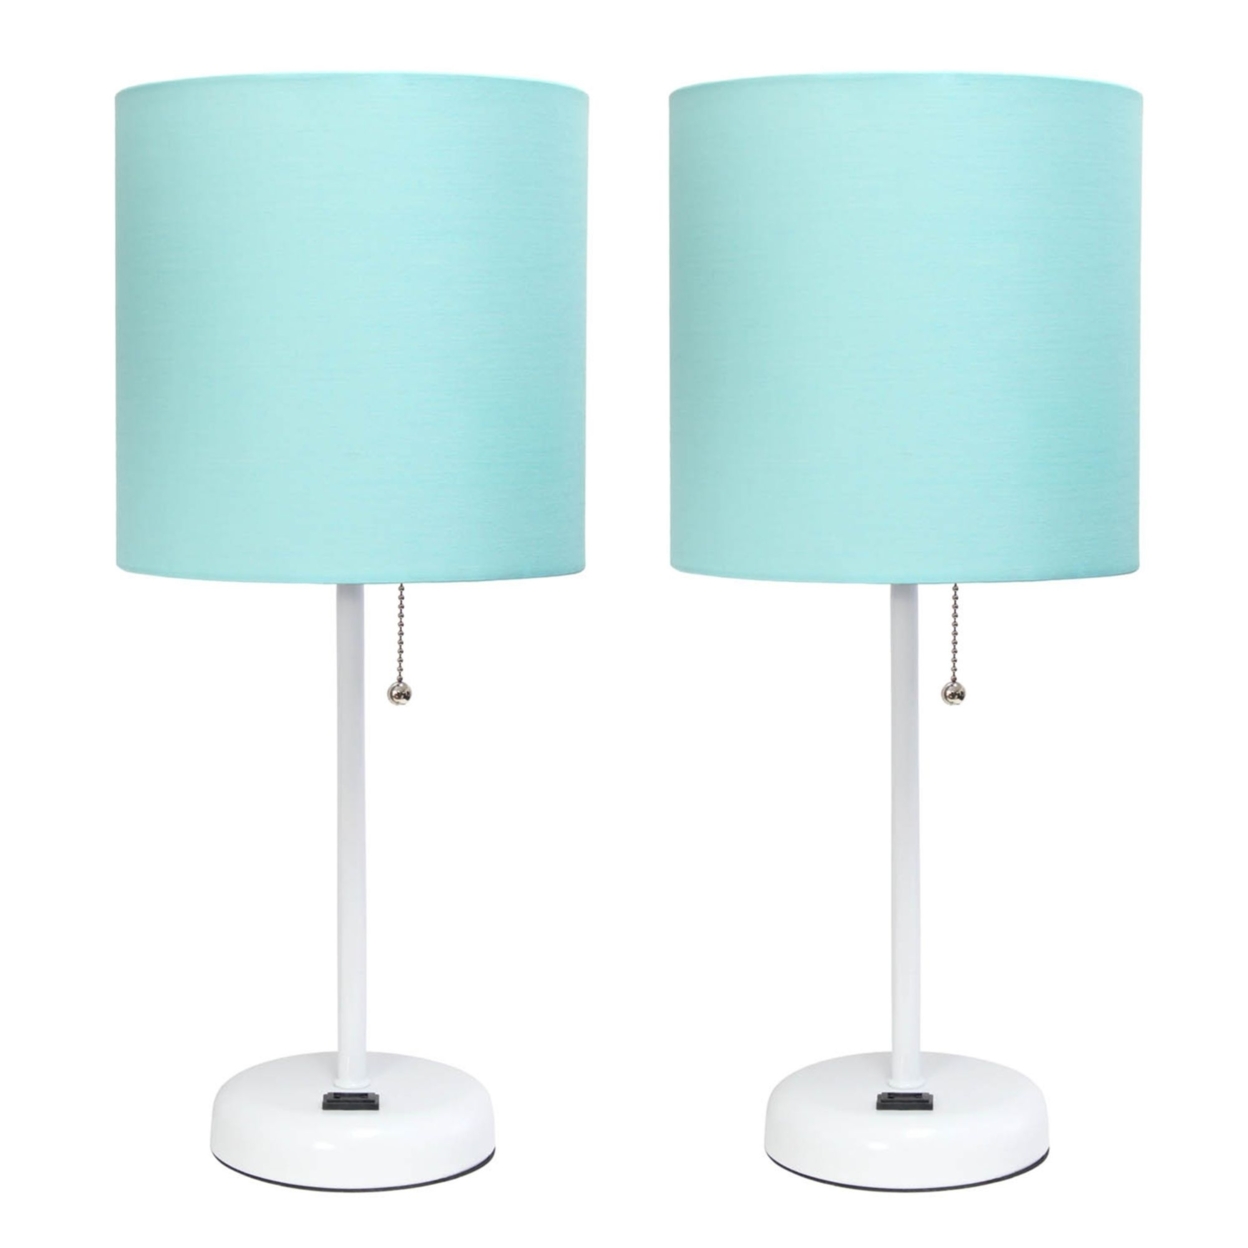 Simple Designs White Stick Lamp with Charging Outlet and Fabric Shade 2 Pack Set, Aqua